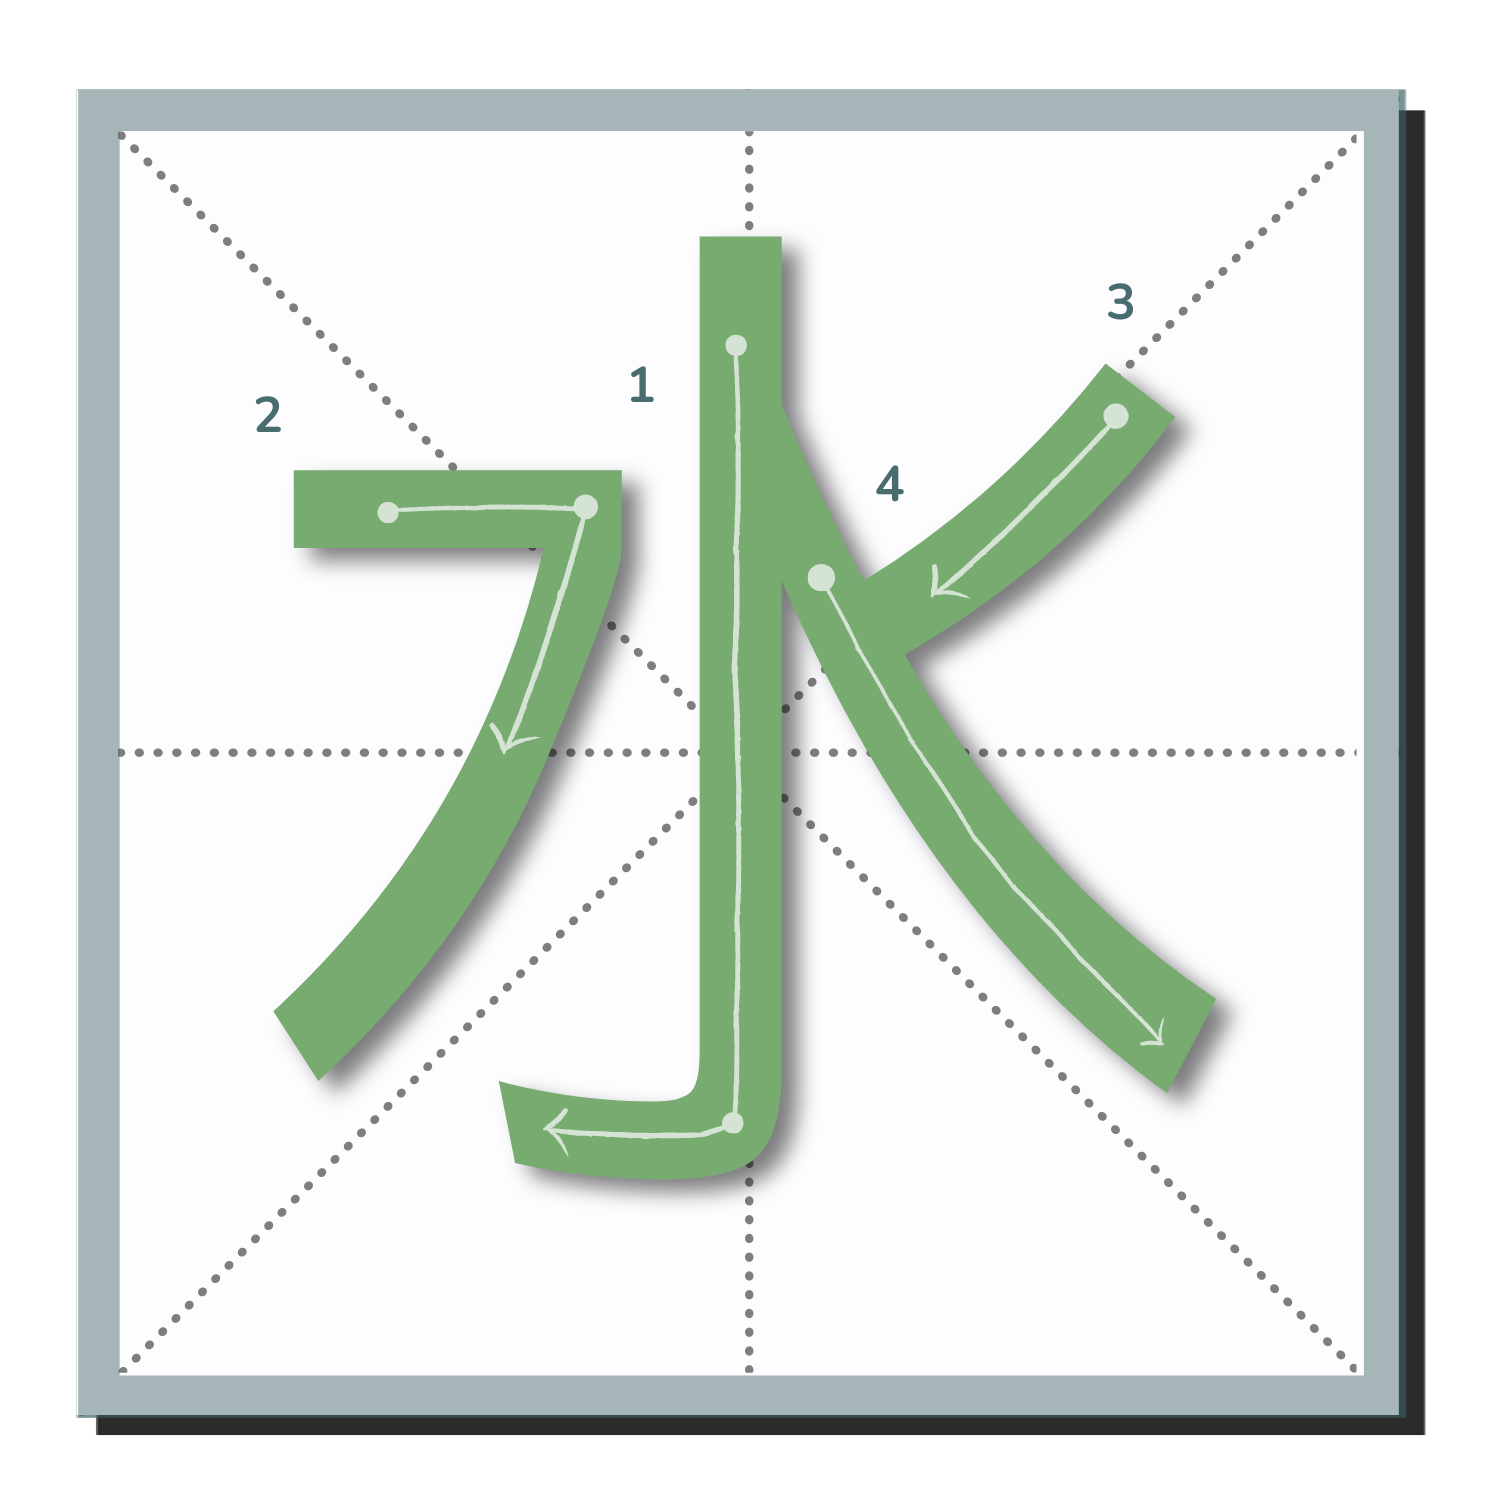 Stroke order for the Chinese character Shui